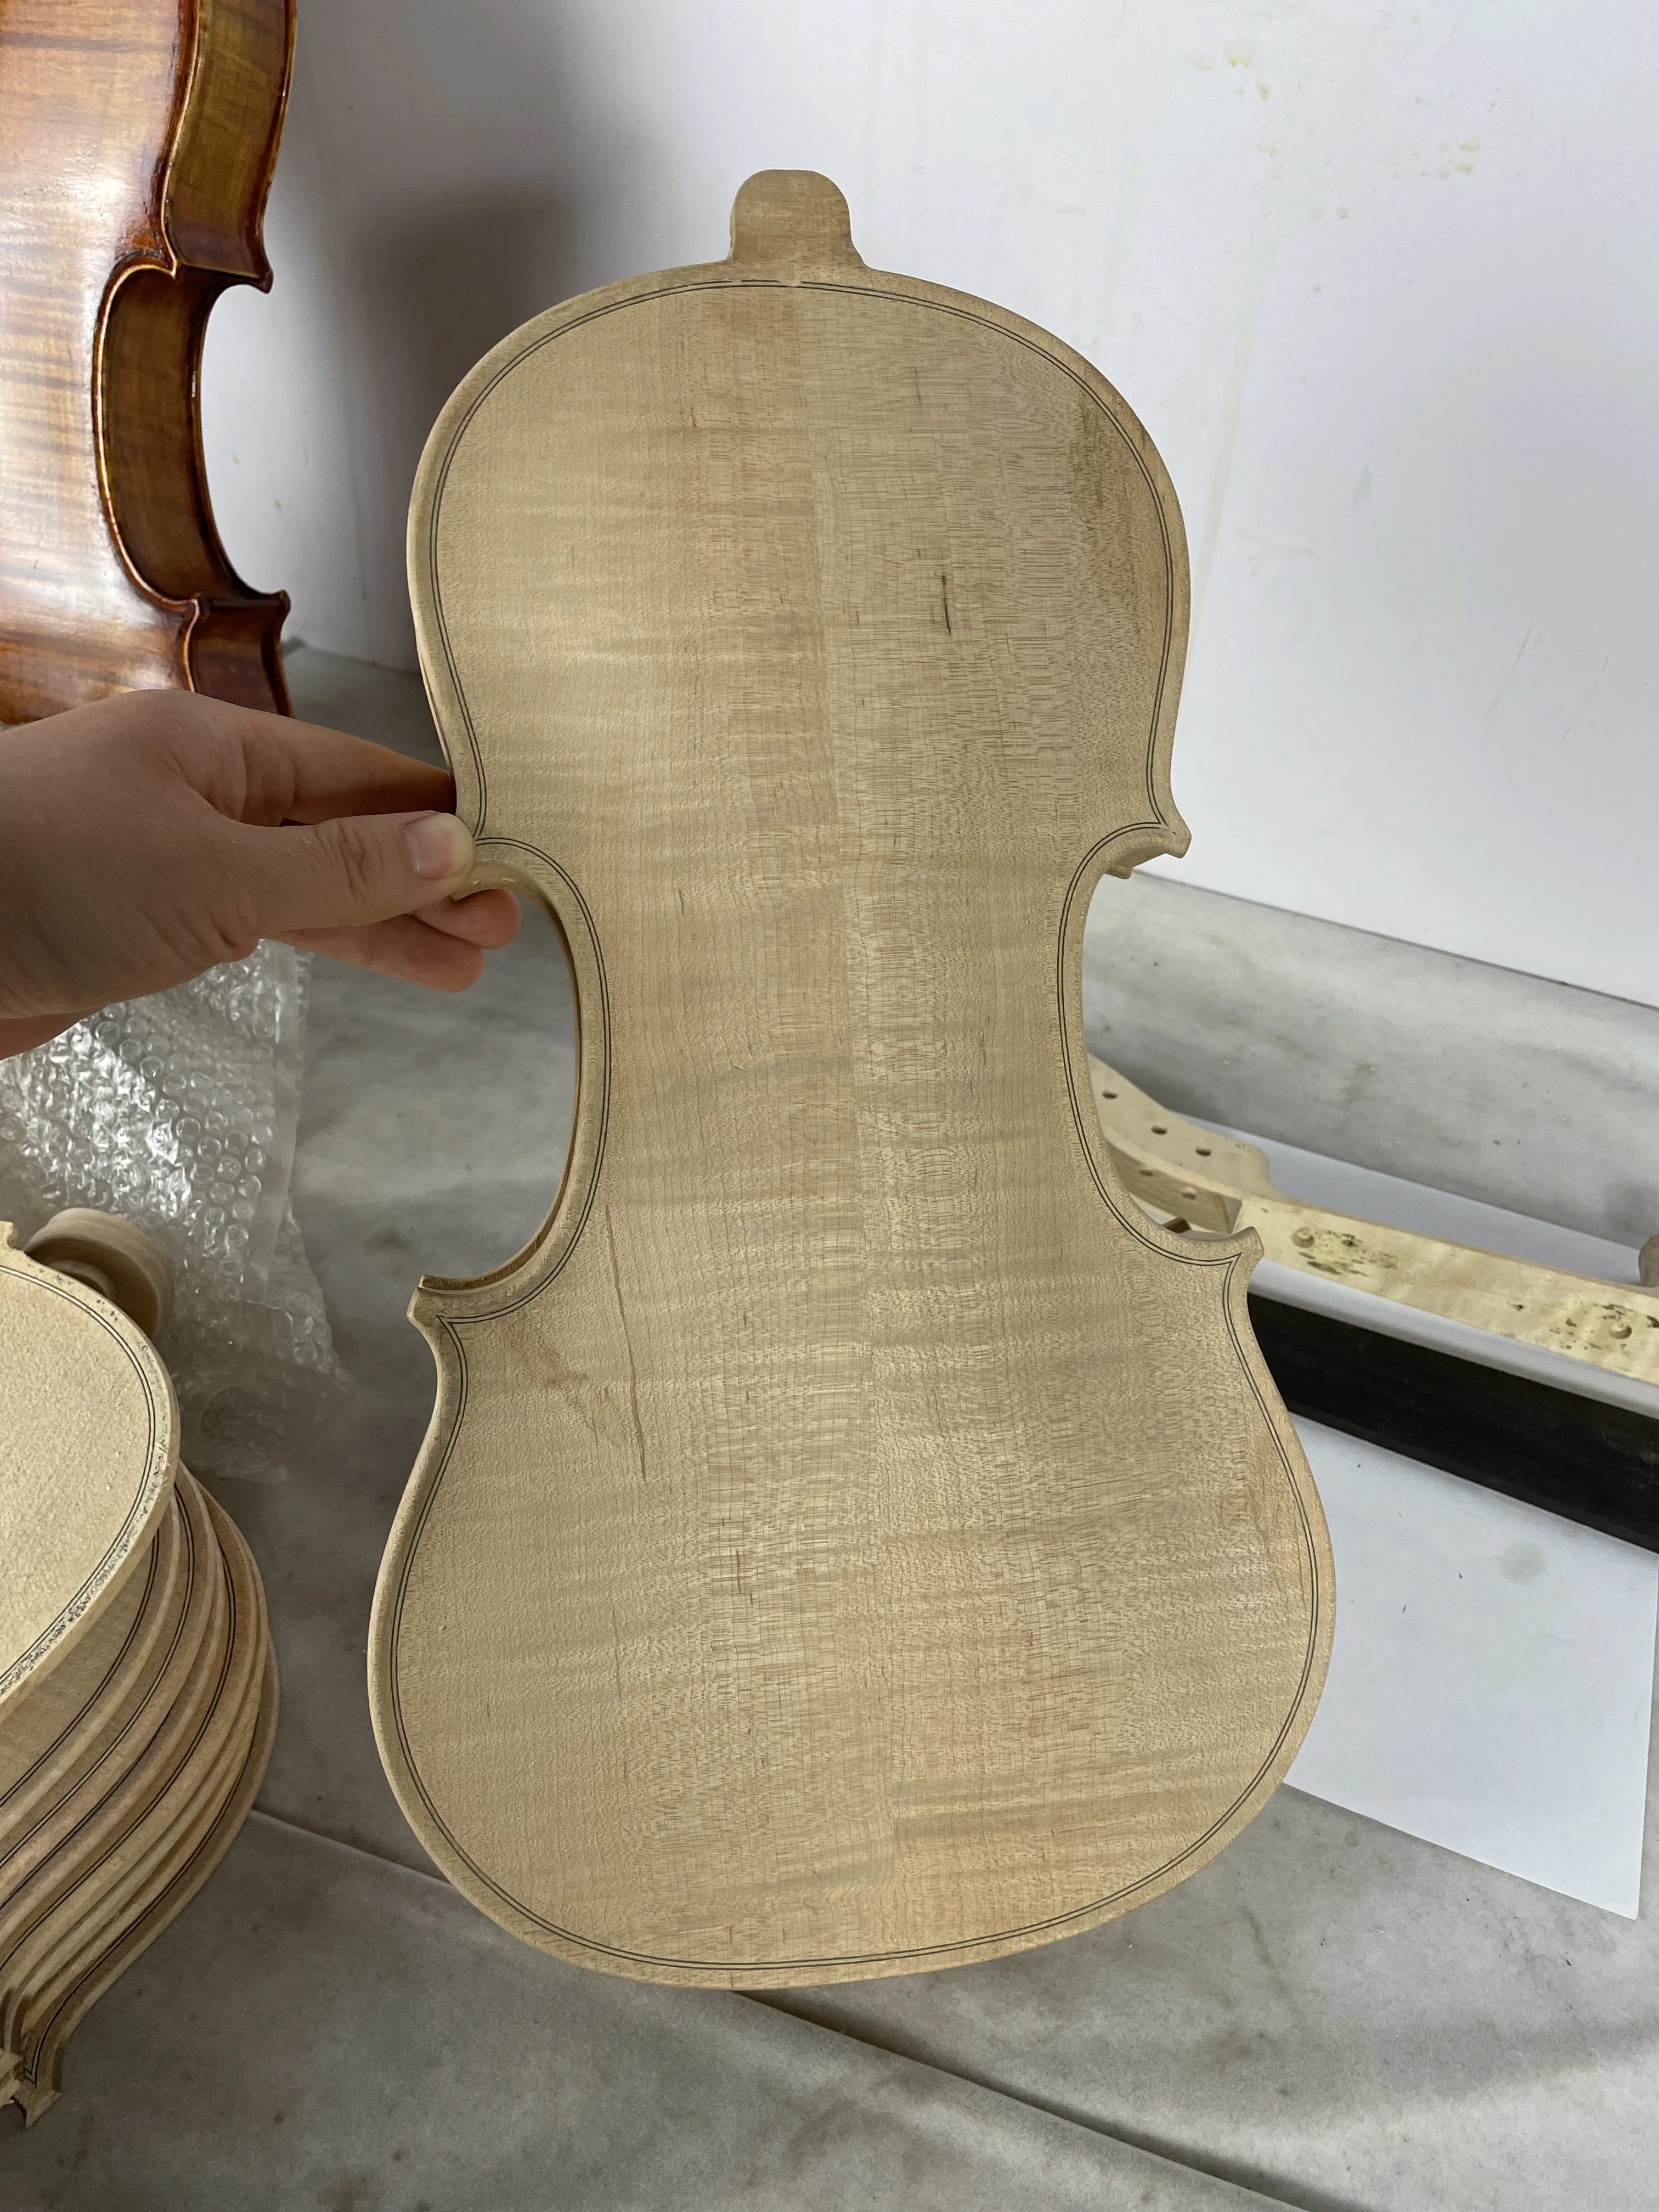 Unfinished white violin 4/4-Violin body&neck flamed maple back side head spruce top ebony fingerboard high quality with case enlarge